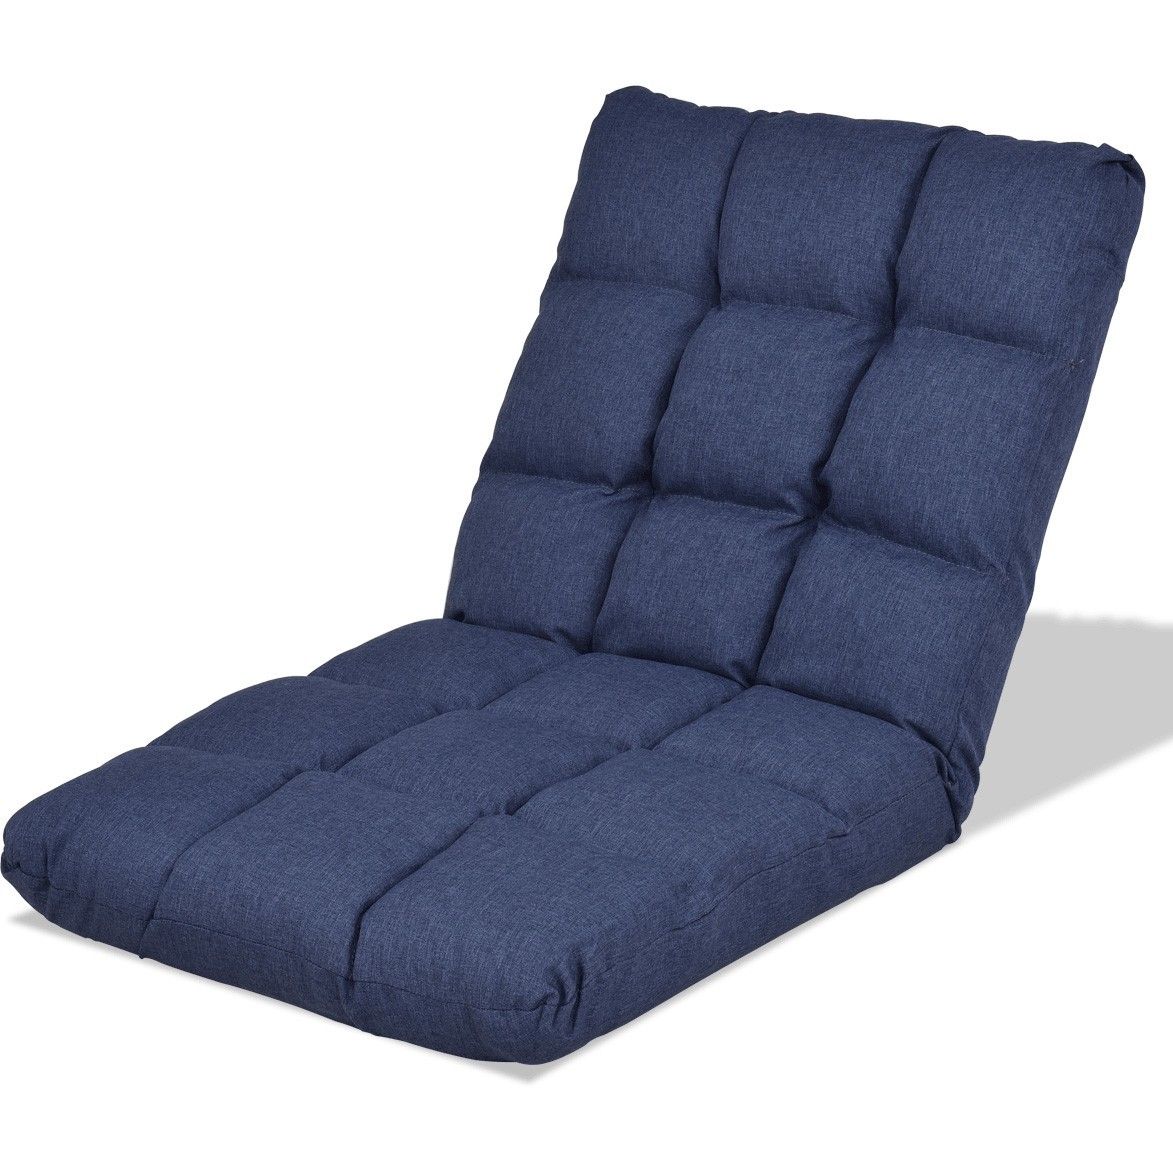 14 Position Adjustable Cushioned Floor Gaming Sofa Chair Within Gaming Sofa Chairs (View 5 of 15)